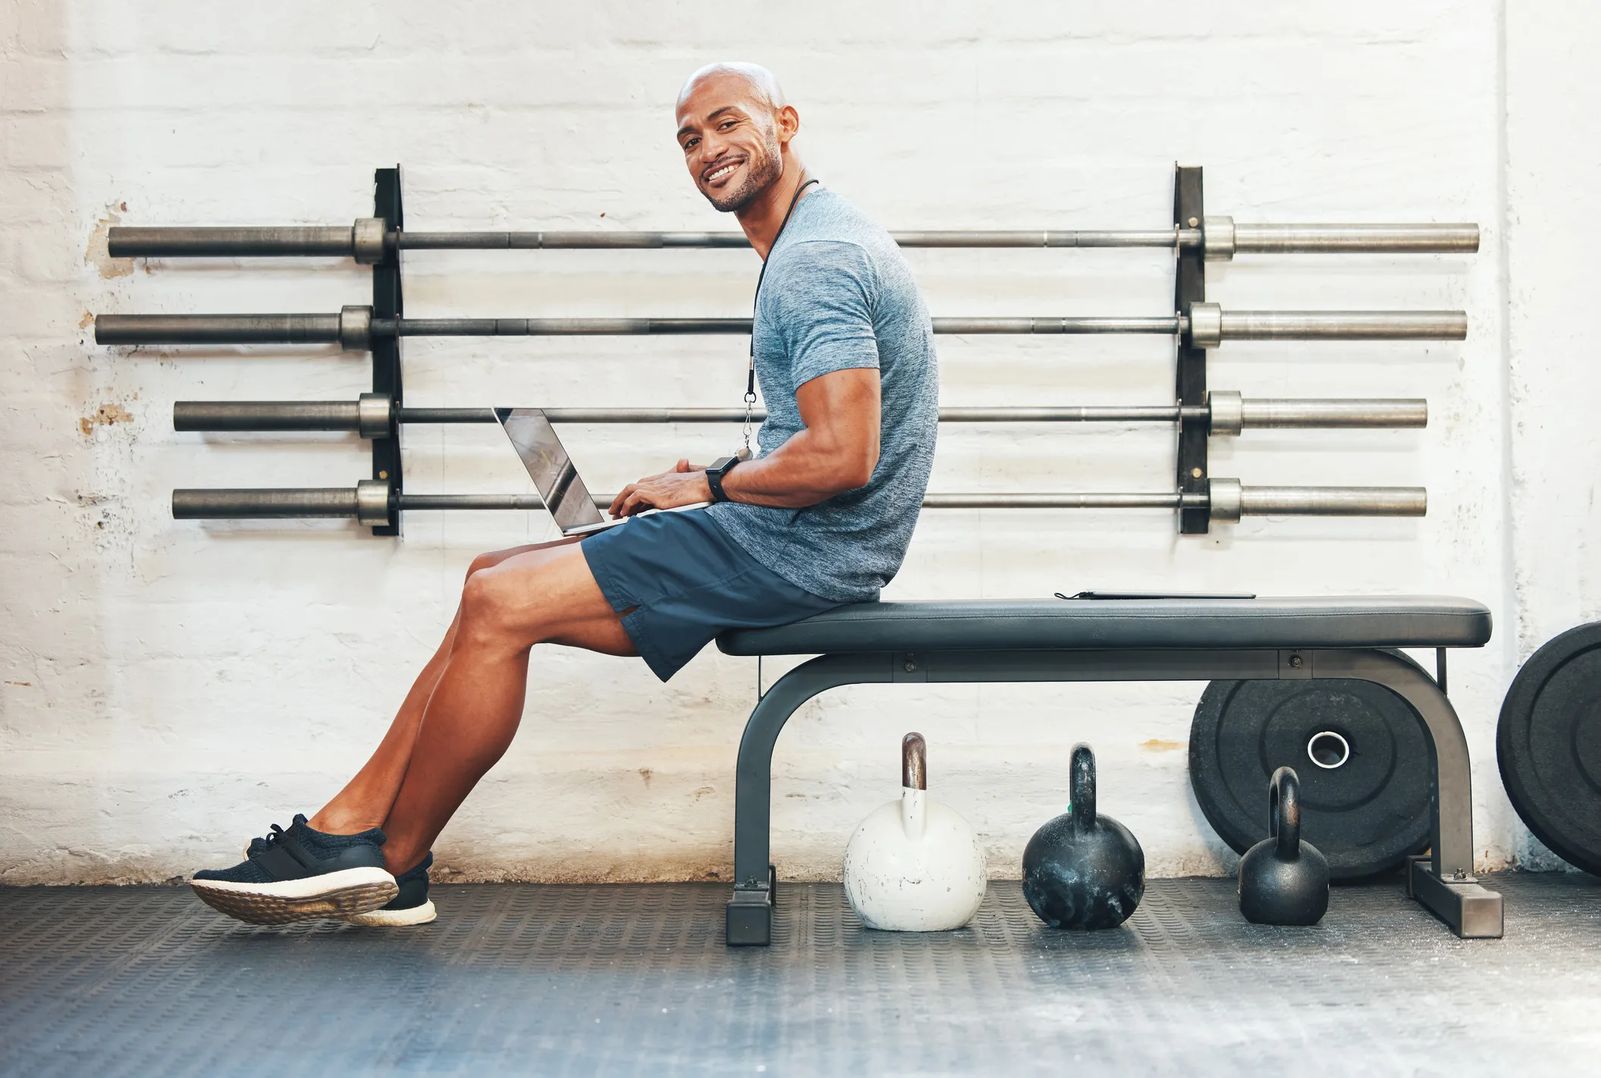 set website goals example - image of man on workout bench with computer